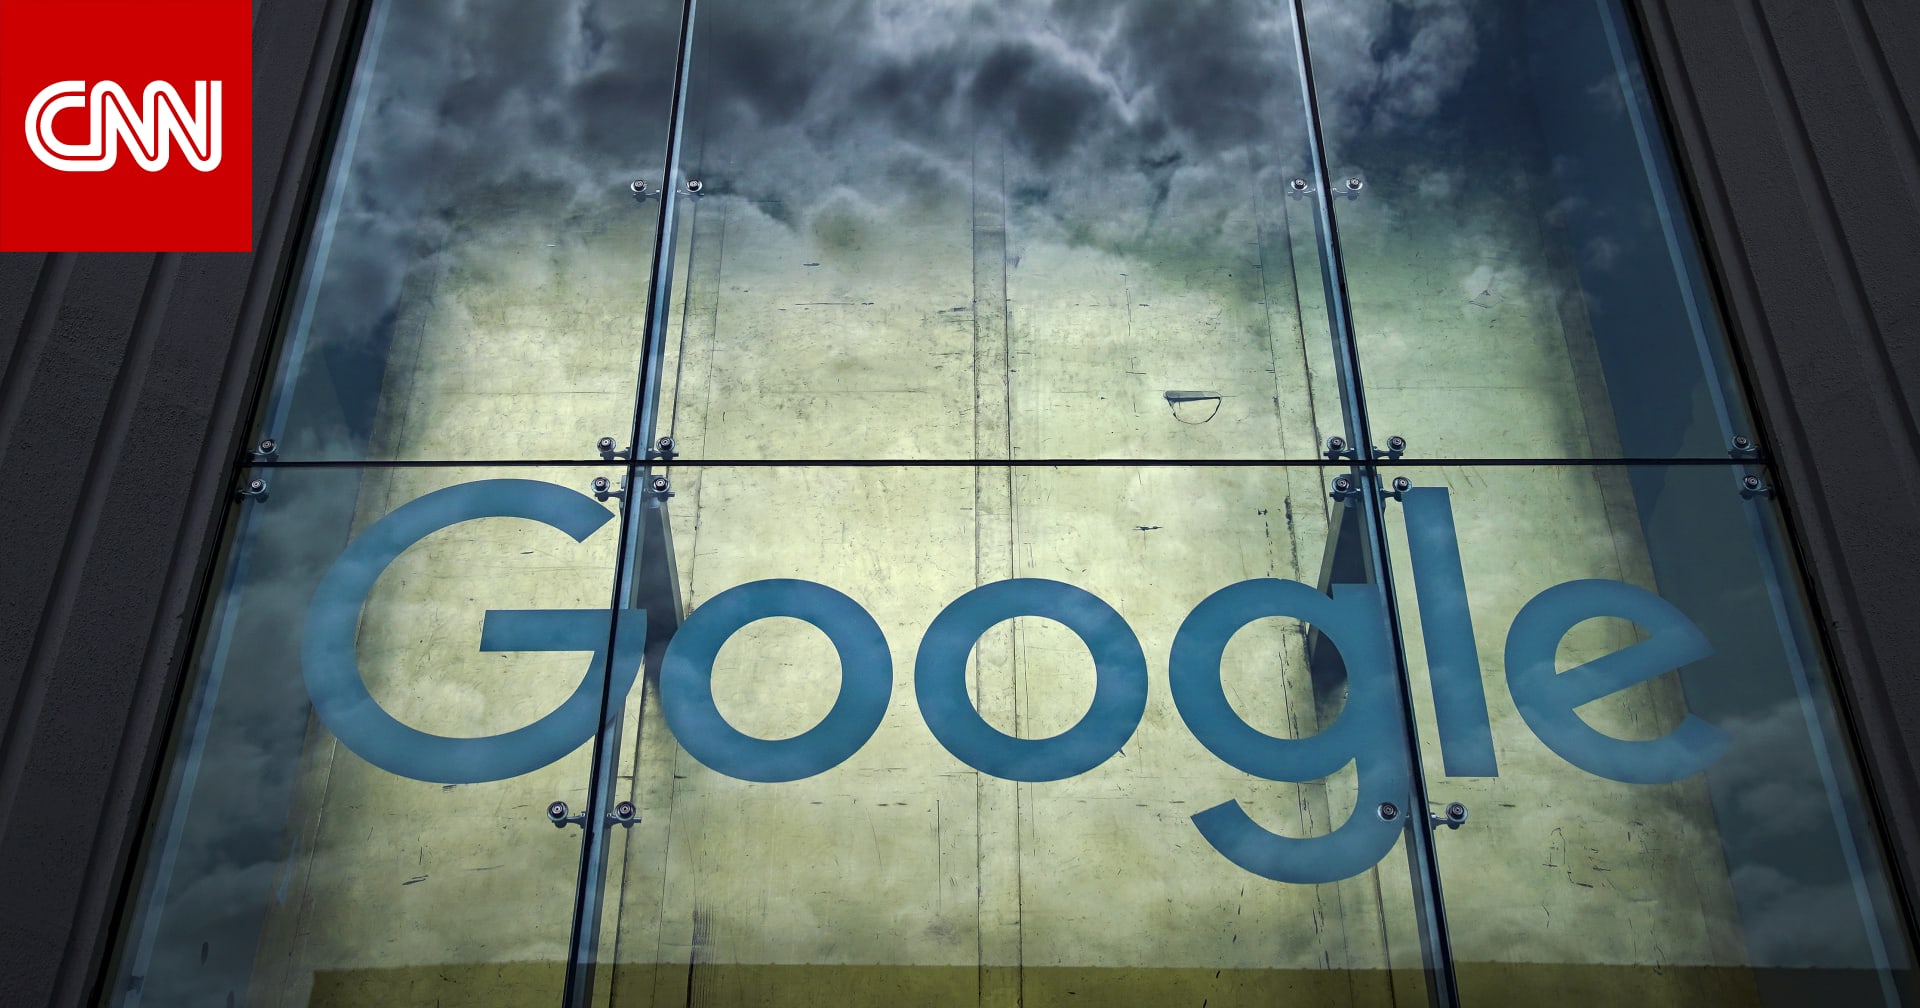 Rights groups urge “Google” to stop plans for the cloud computing project in Saudi Arabia